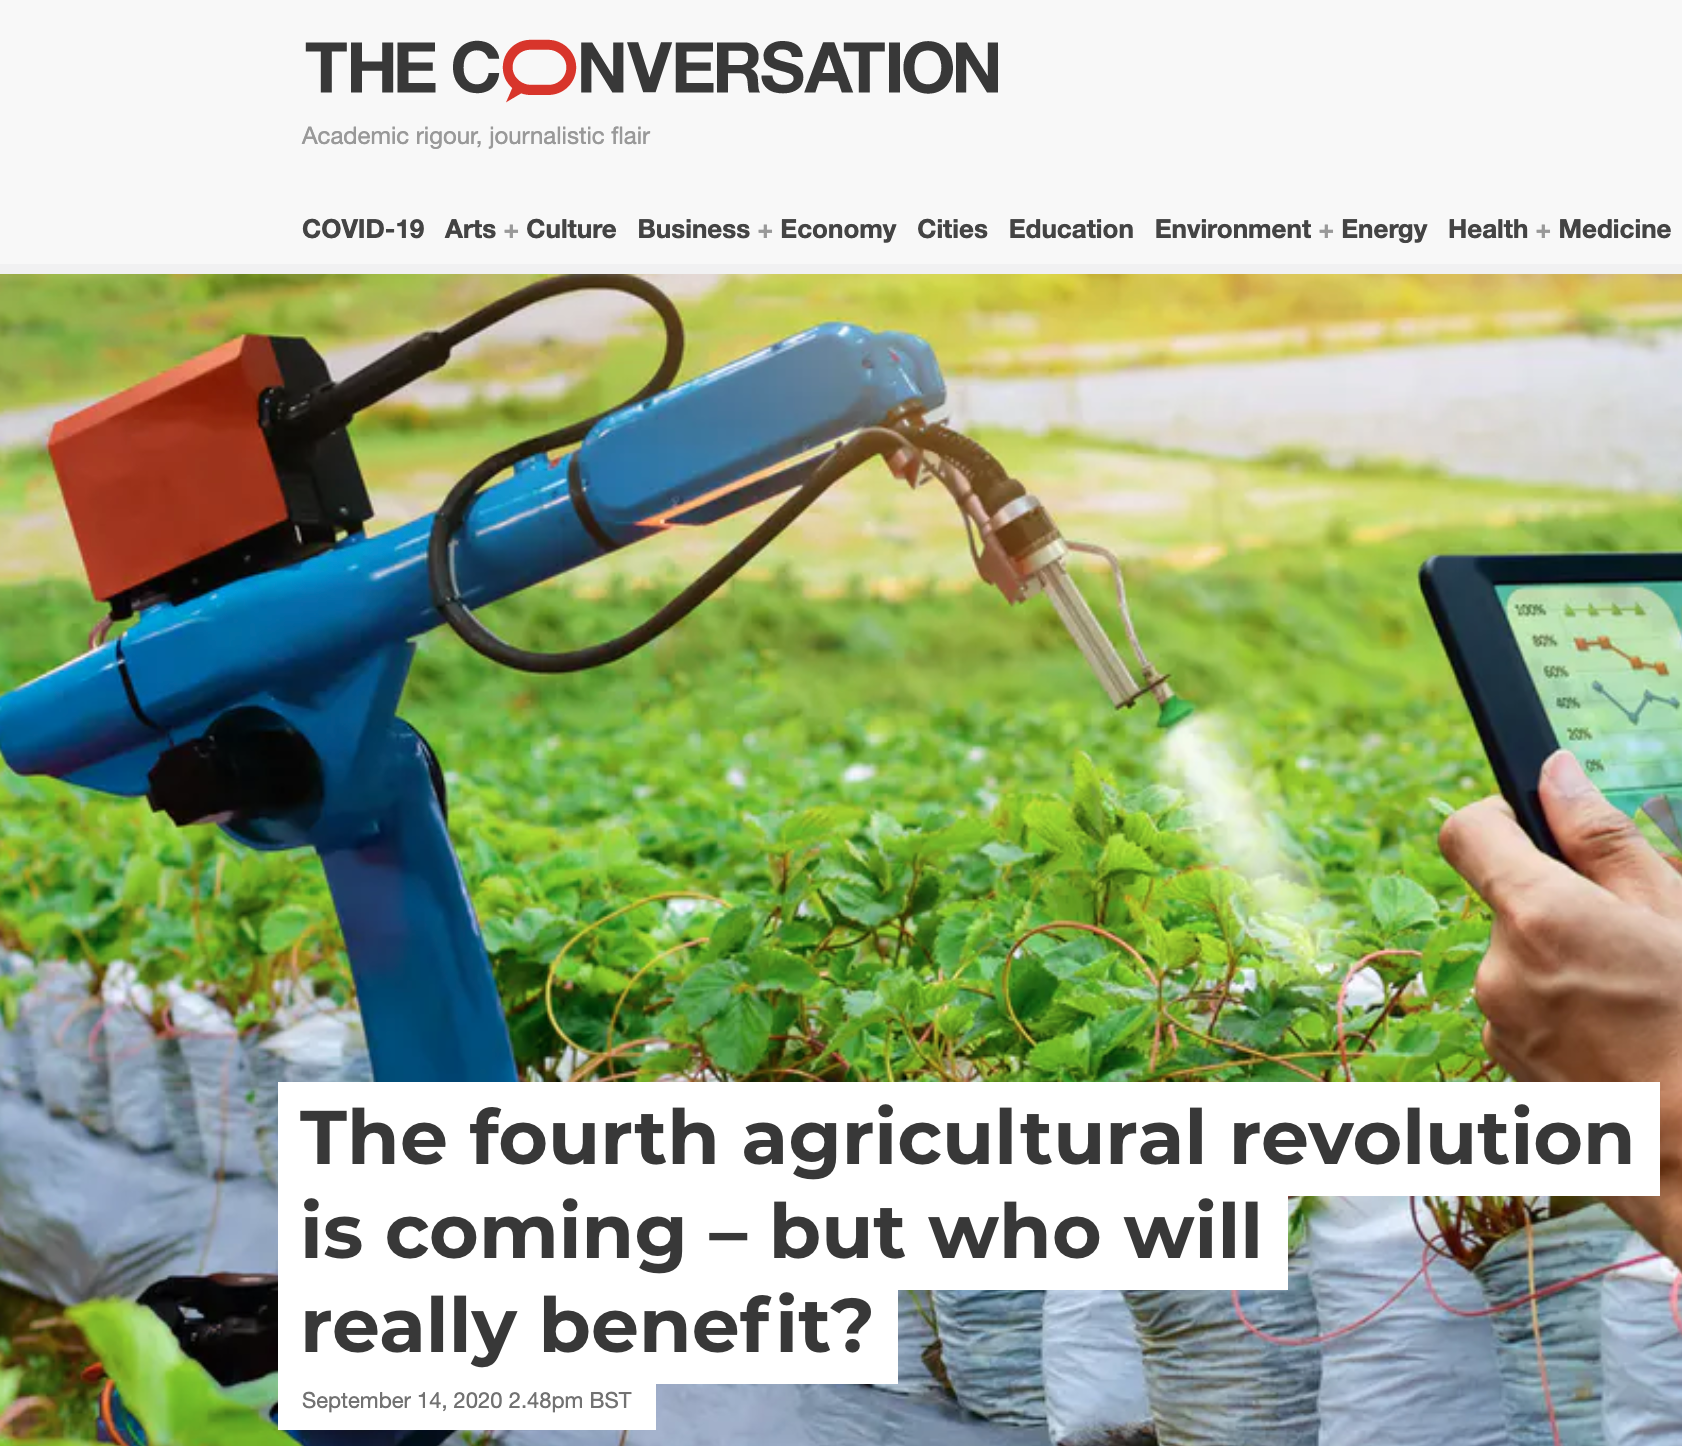 The fourth agricultural revolution is coming – but who will really benefit?